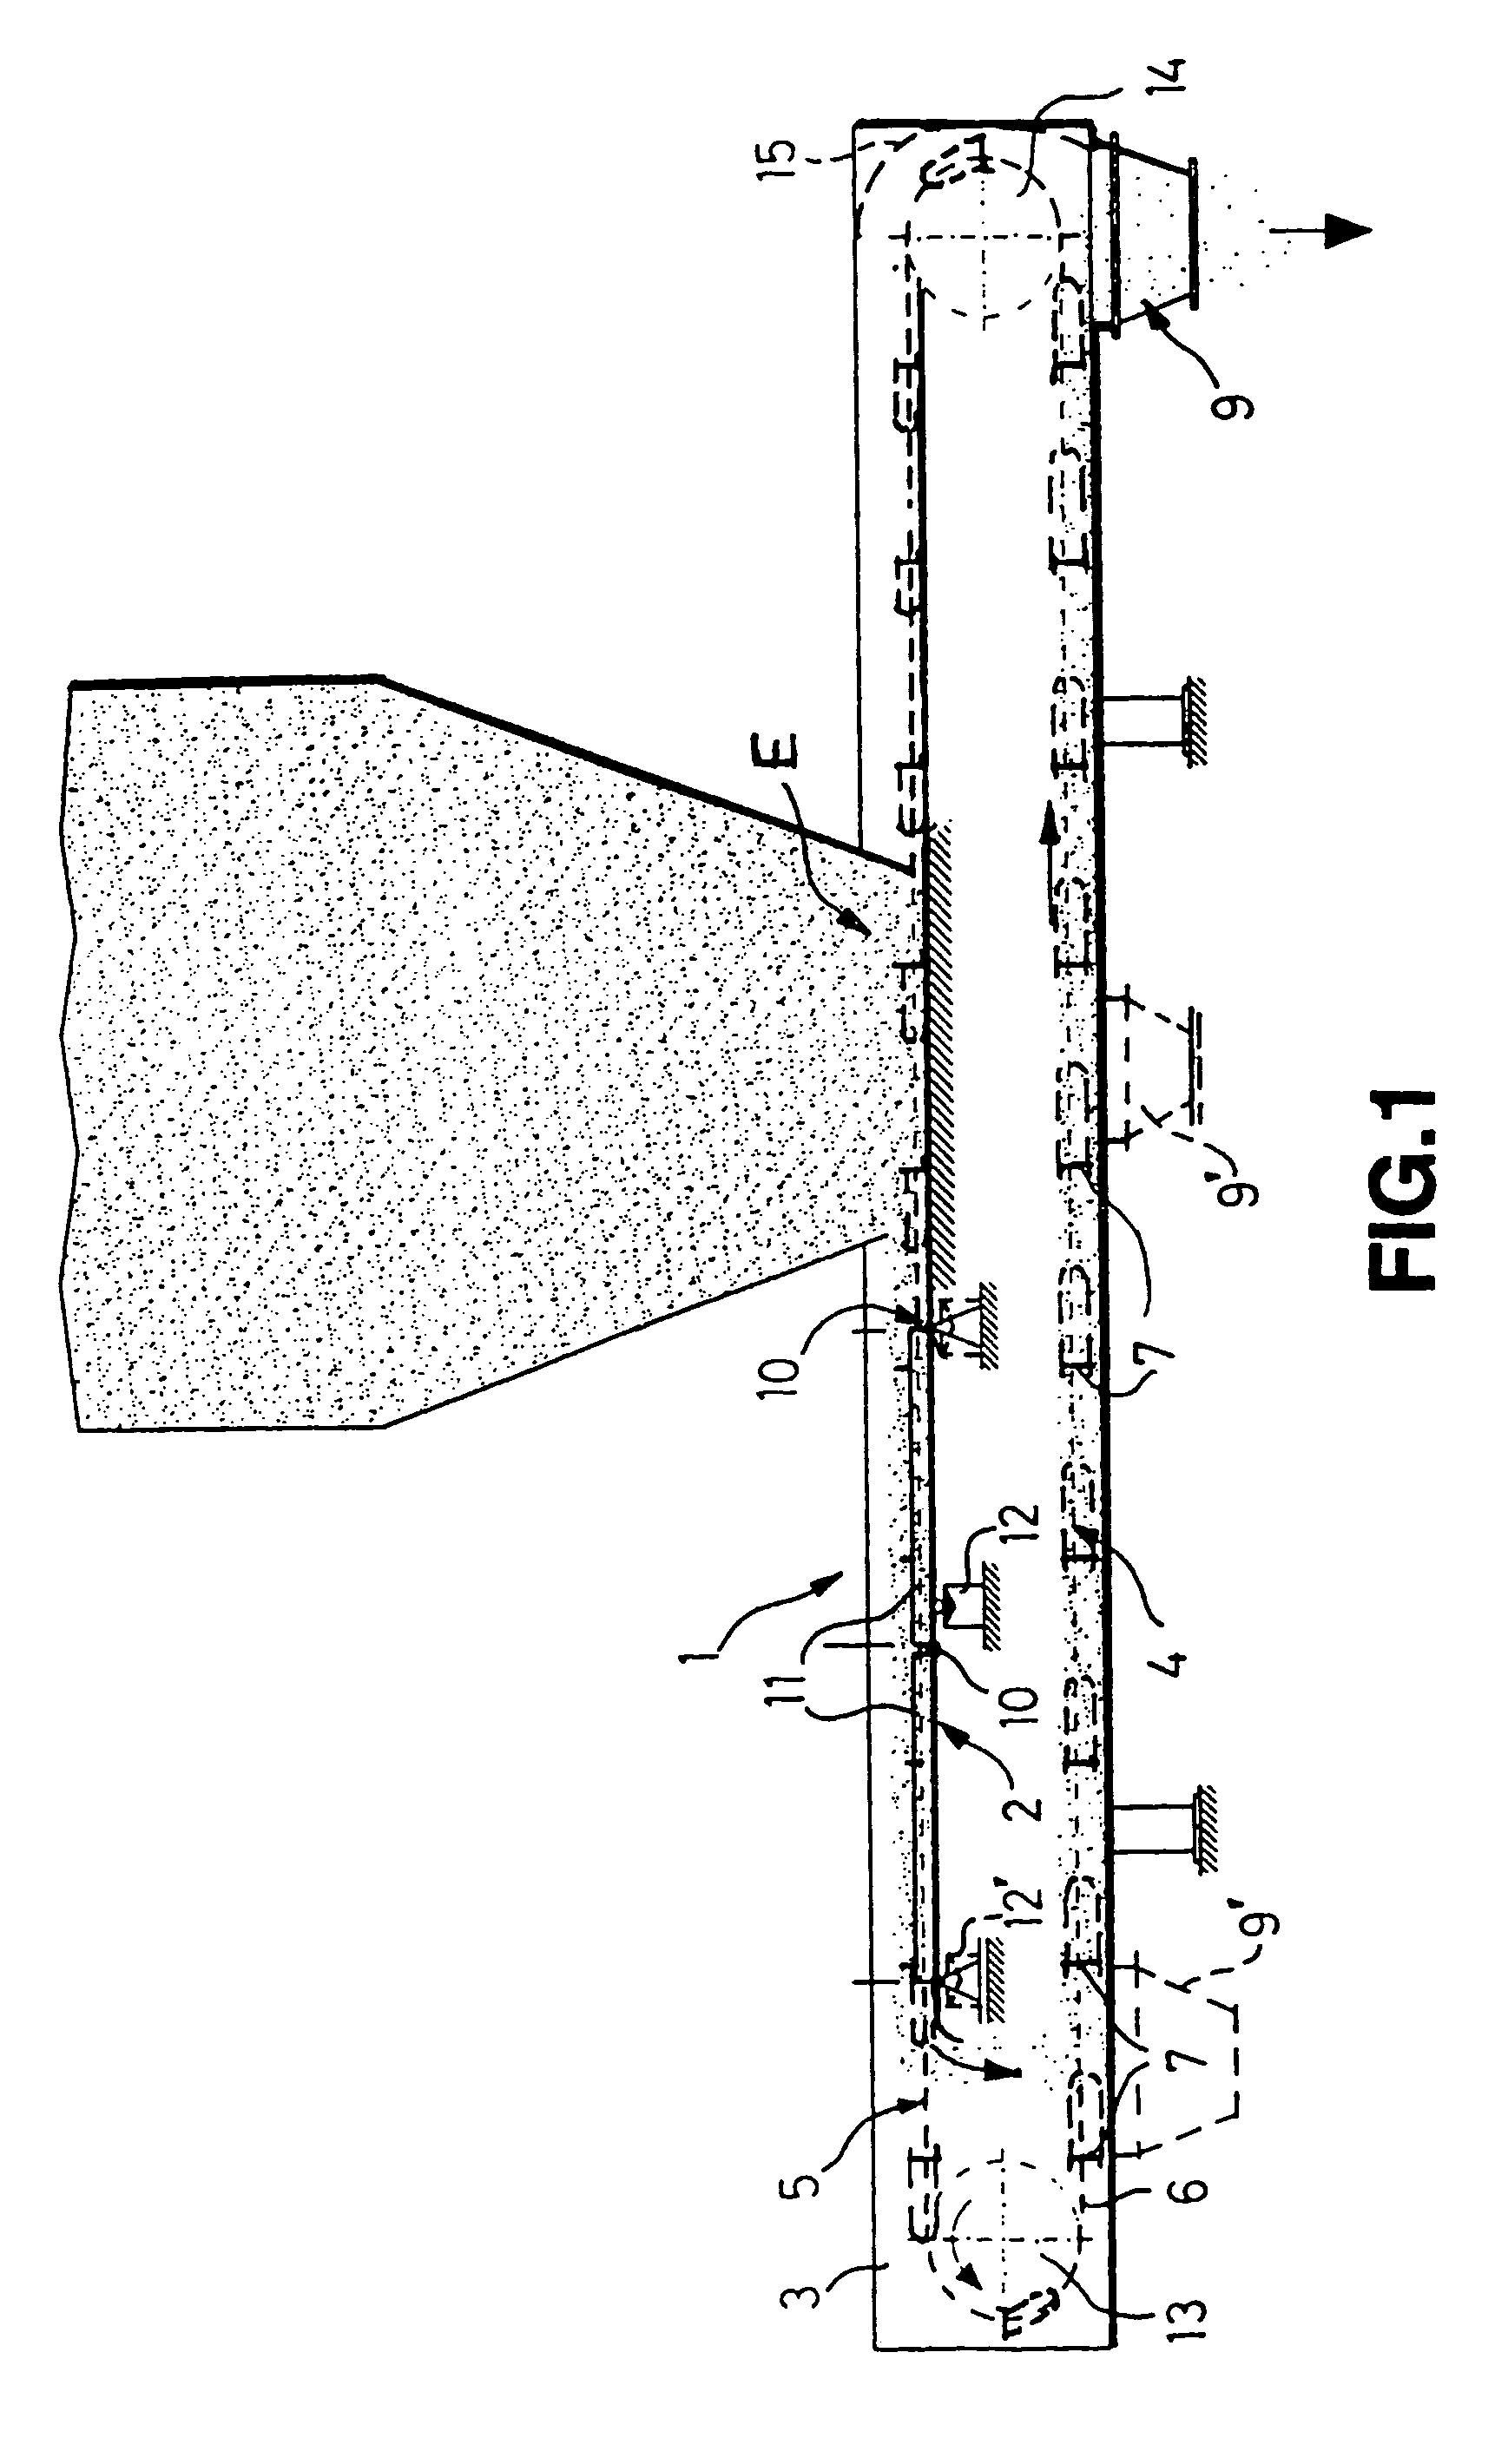 Chain conveyor in the form of scales